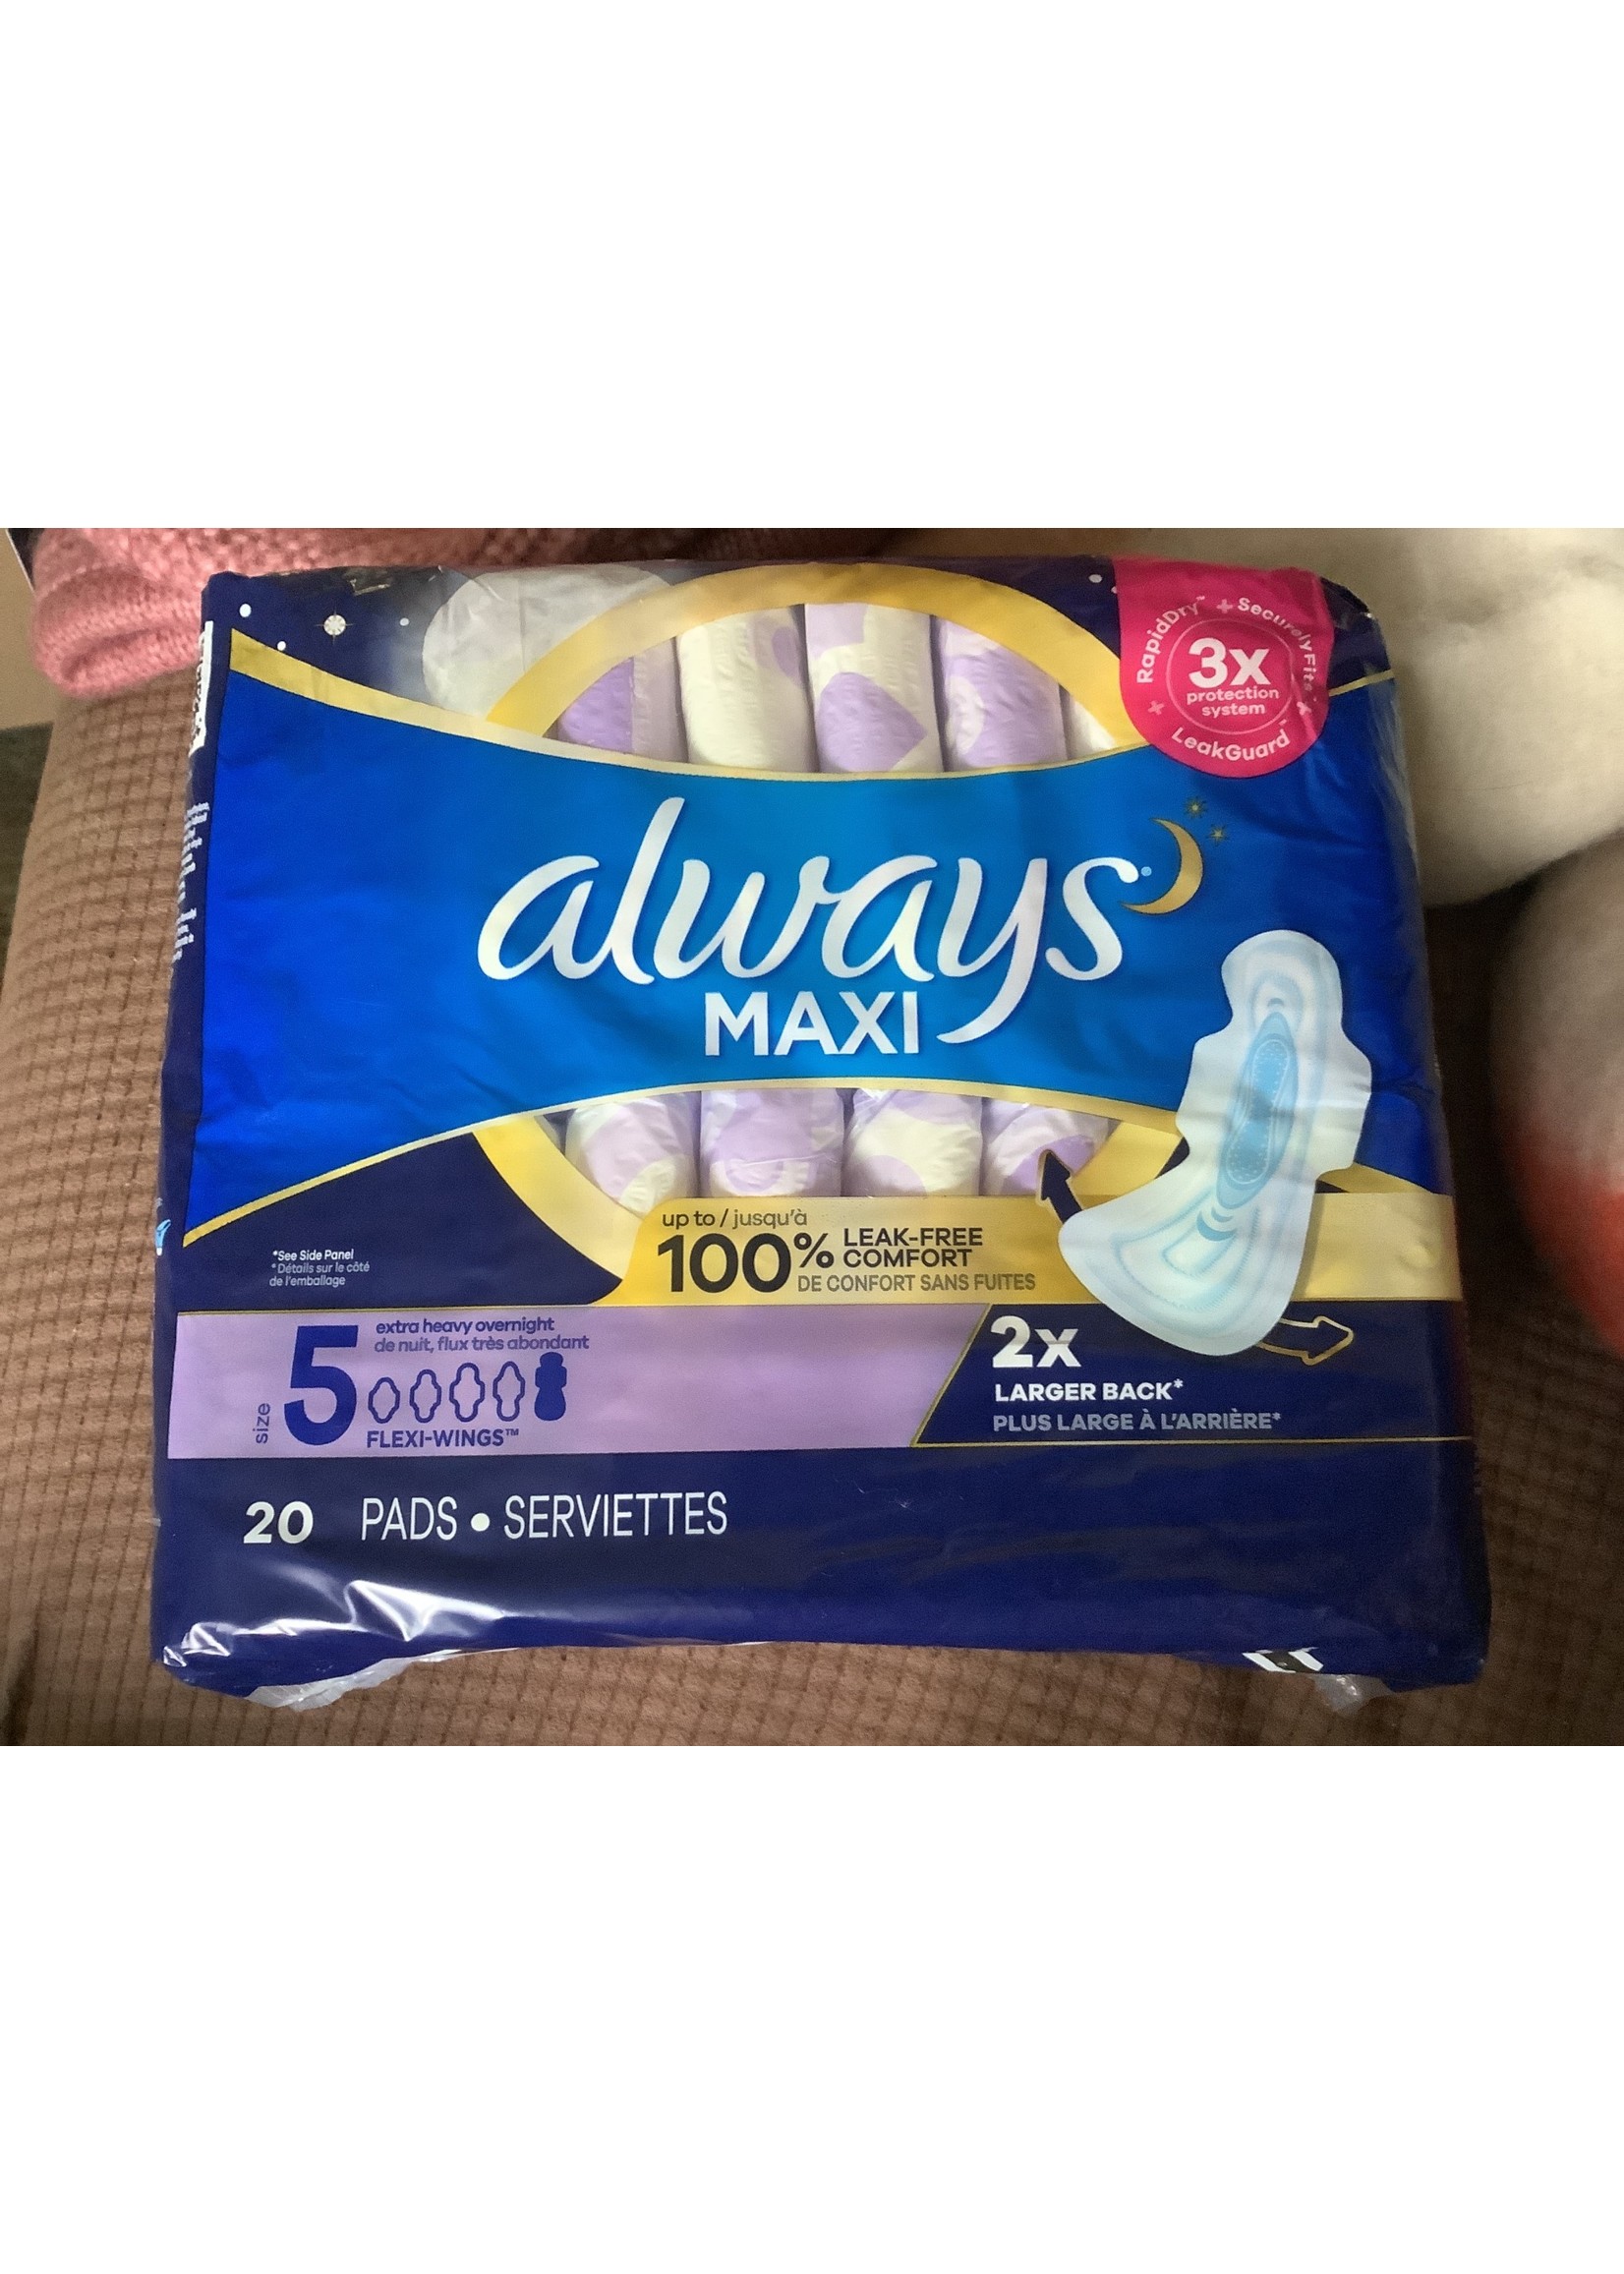 Always Maxi Extra Heavy Overnight Pads with Wings - Size 5 - 20ct